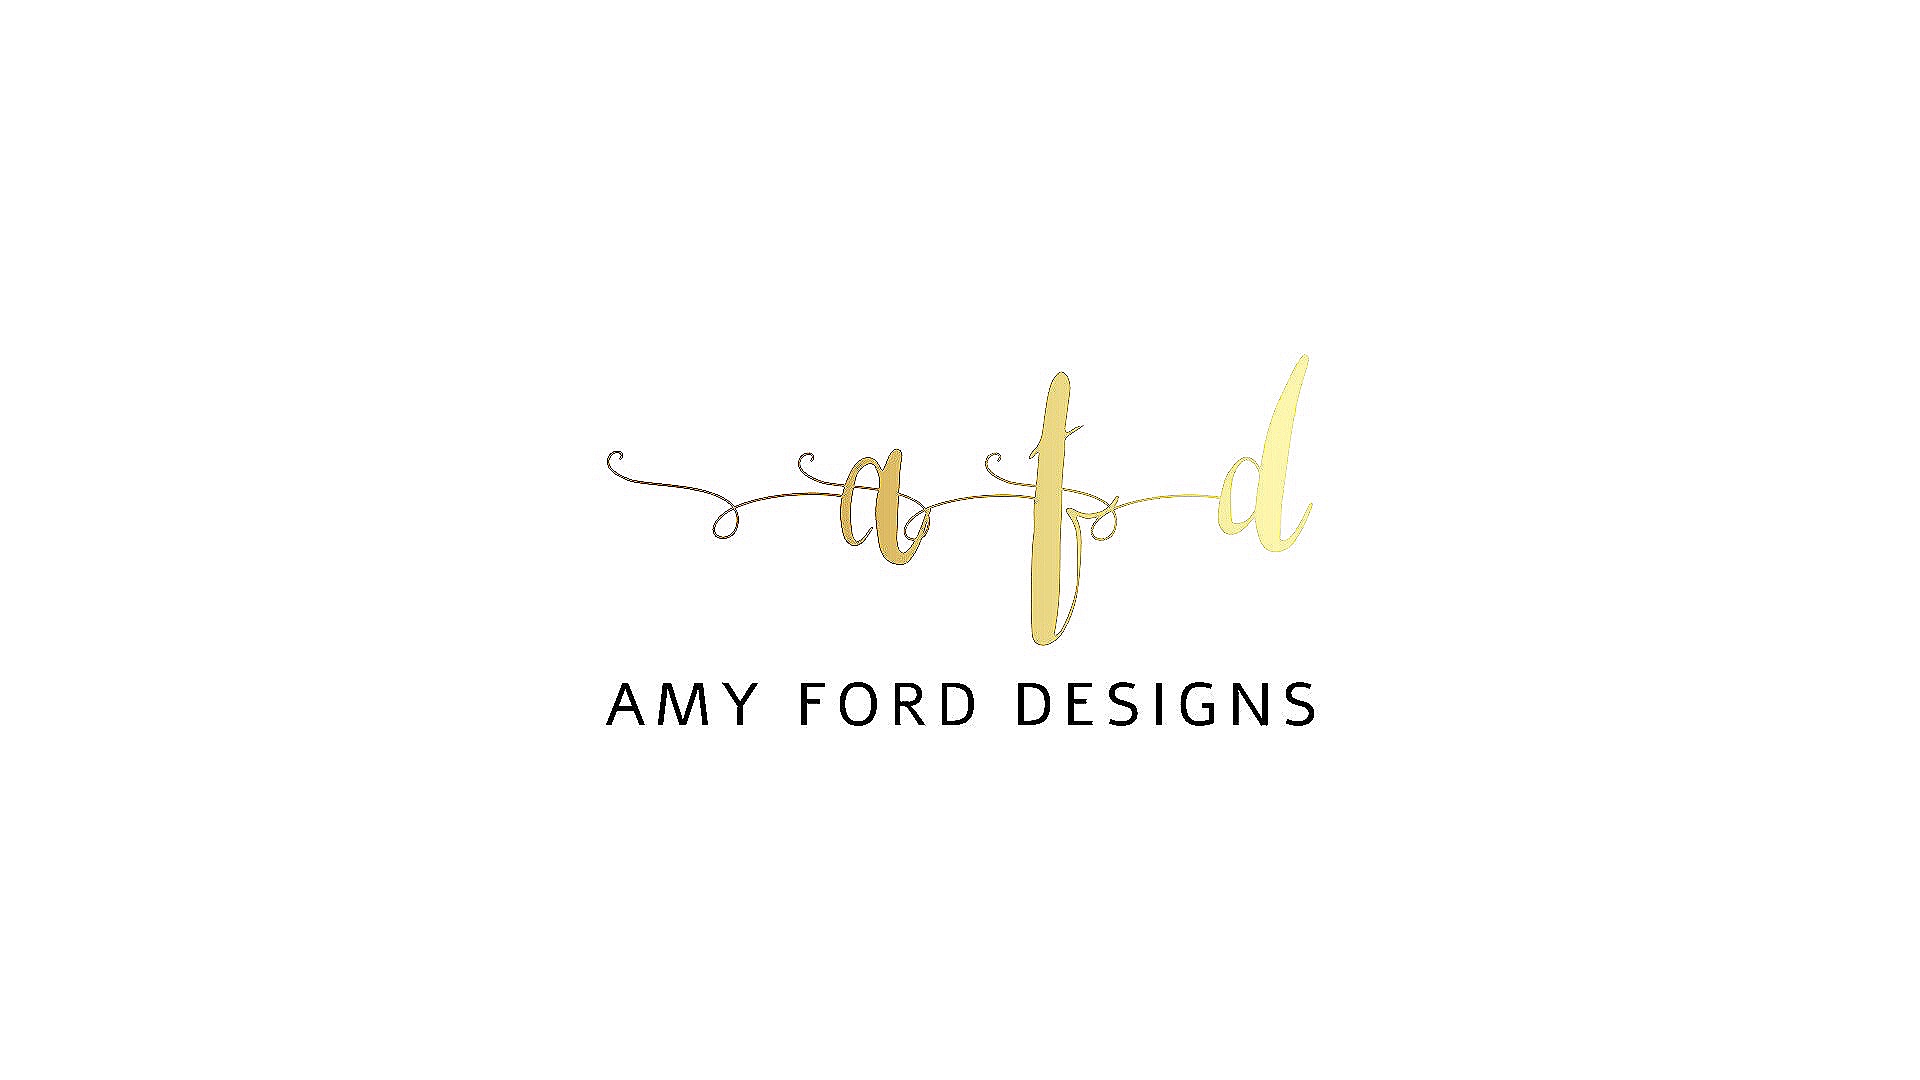 AMY FORD DESIGNS